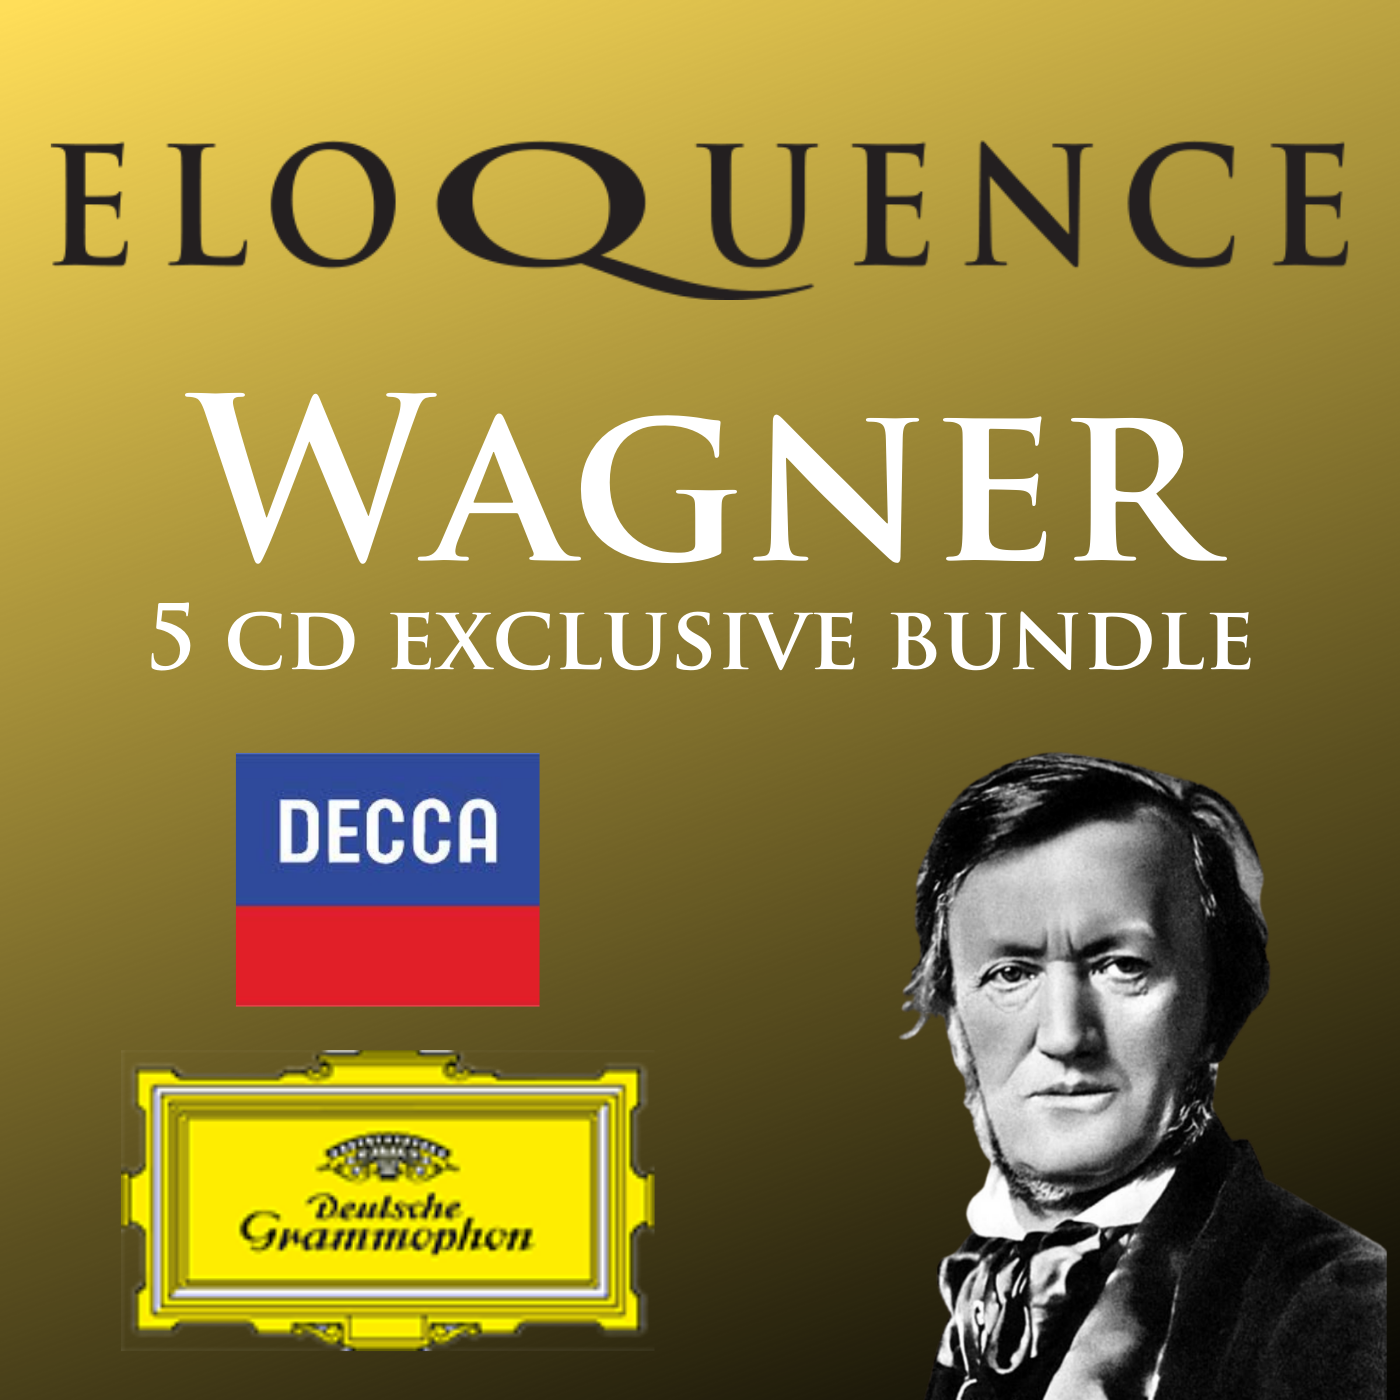 WAGNER: THE ELOQUENCE 5 for $25